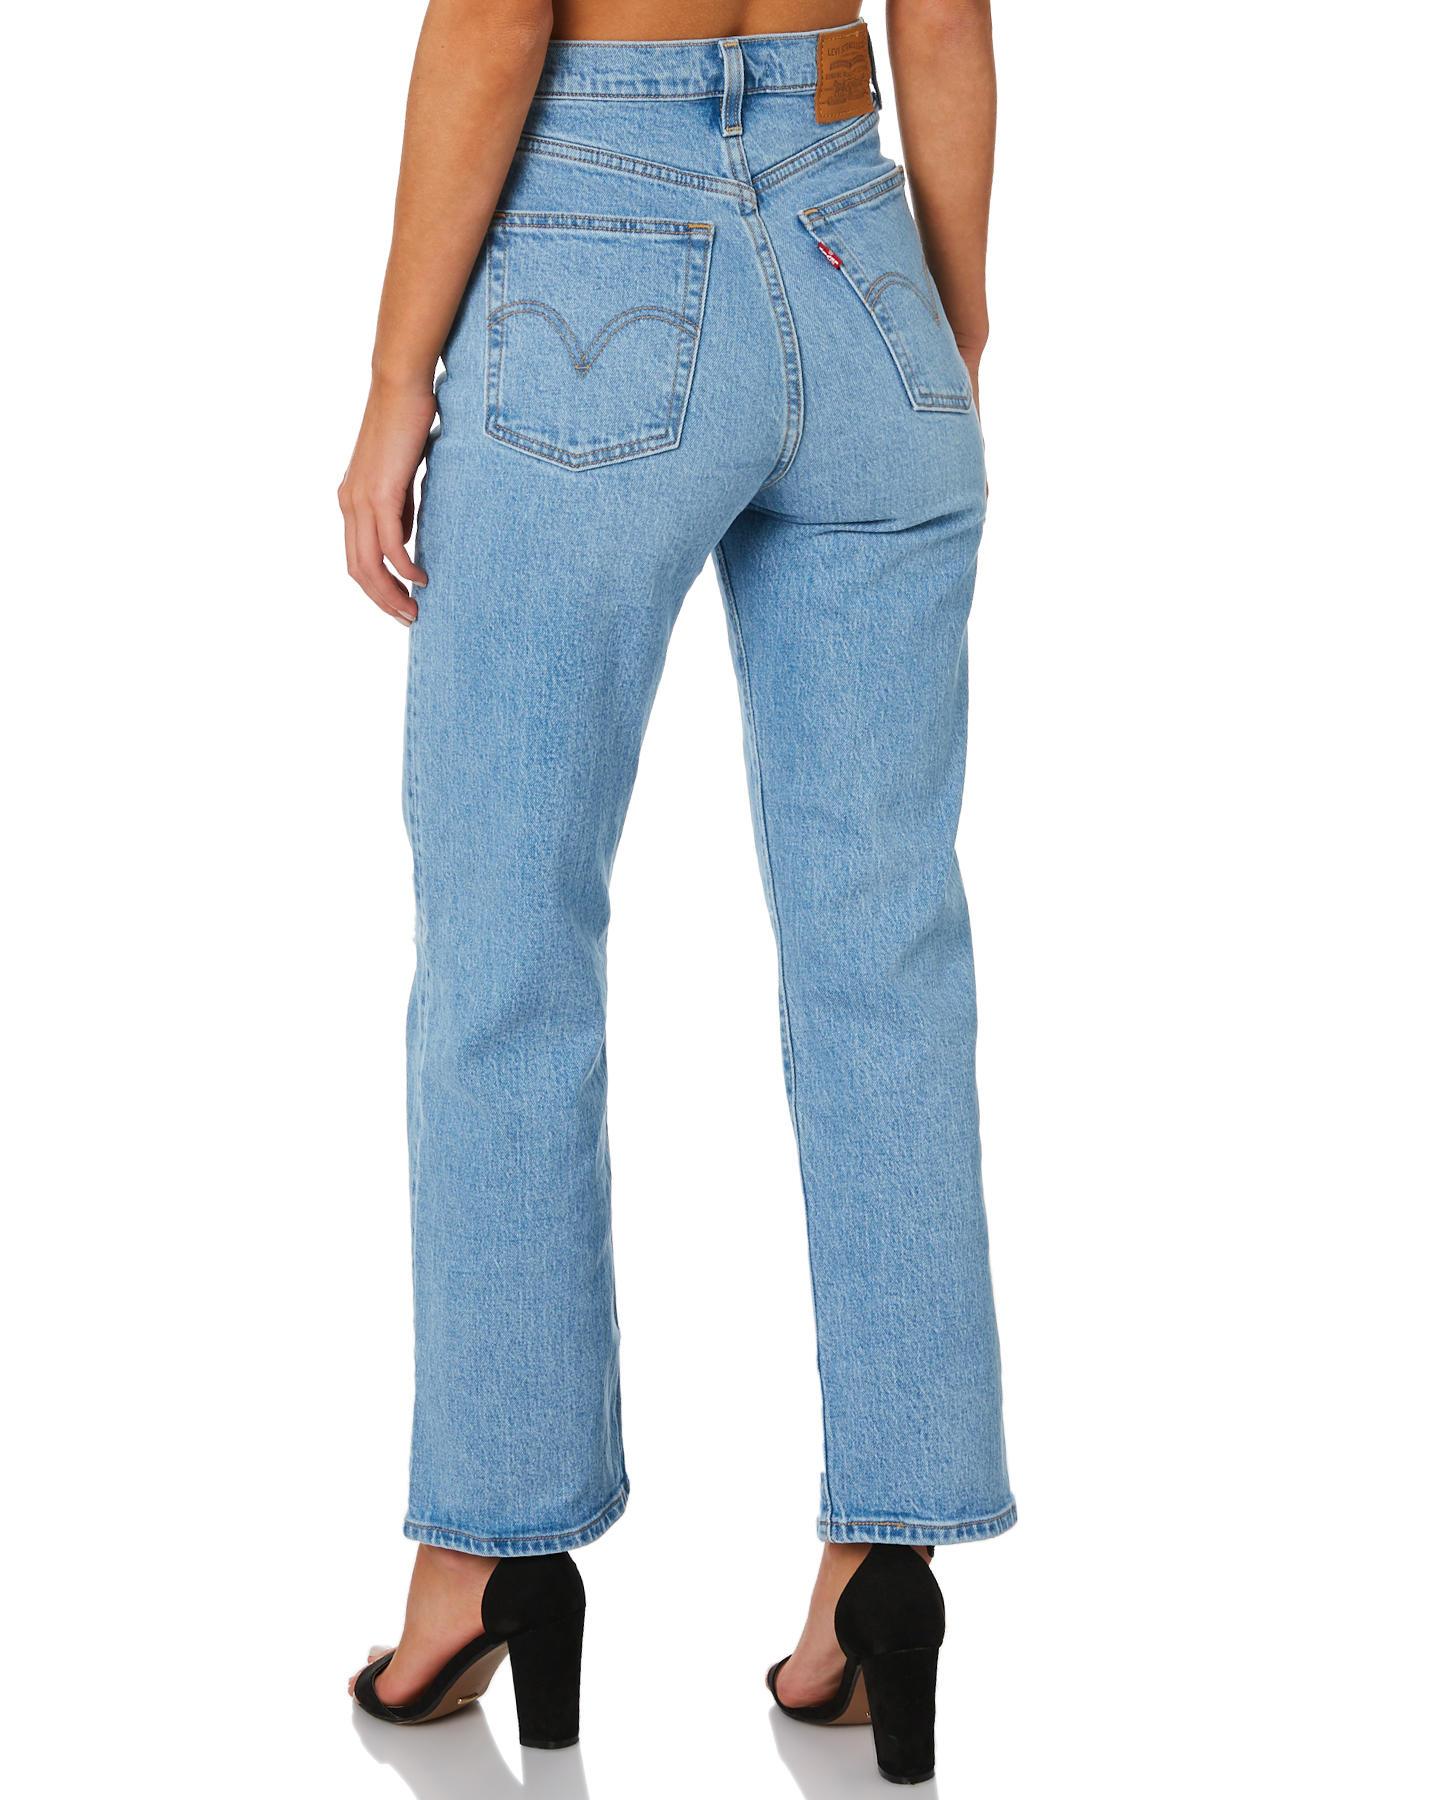 Levi's Ribcage Straight Ankle Jean - Tango Blue | SurfStitch